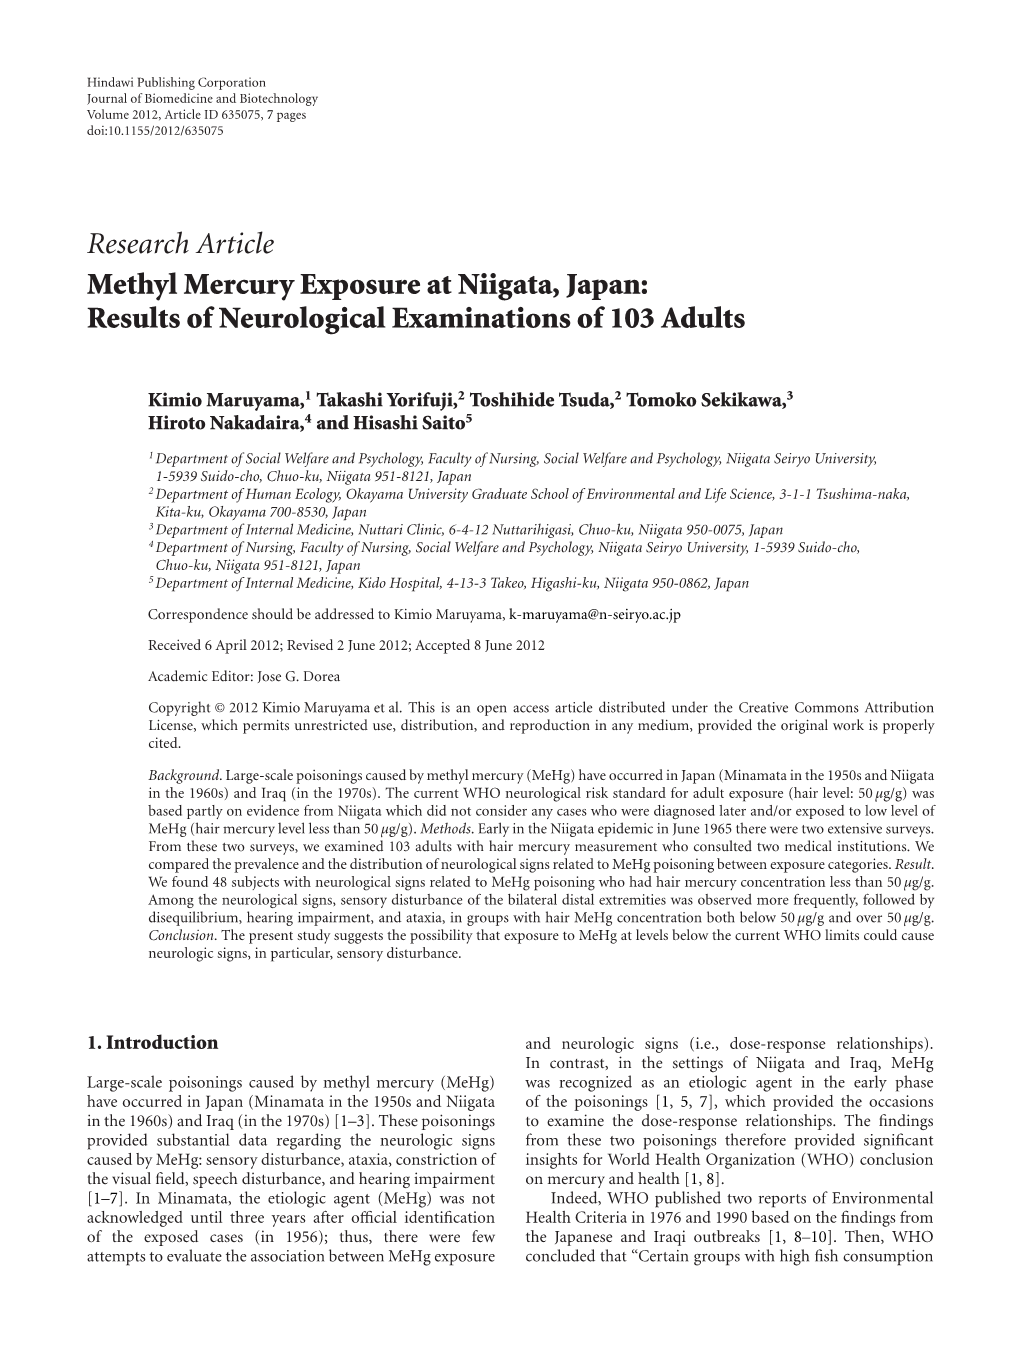 Research Article Methyl Mercury Exposure at Niigata, Japan: Results of Neurological Examinations of 103 Adults